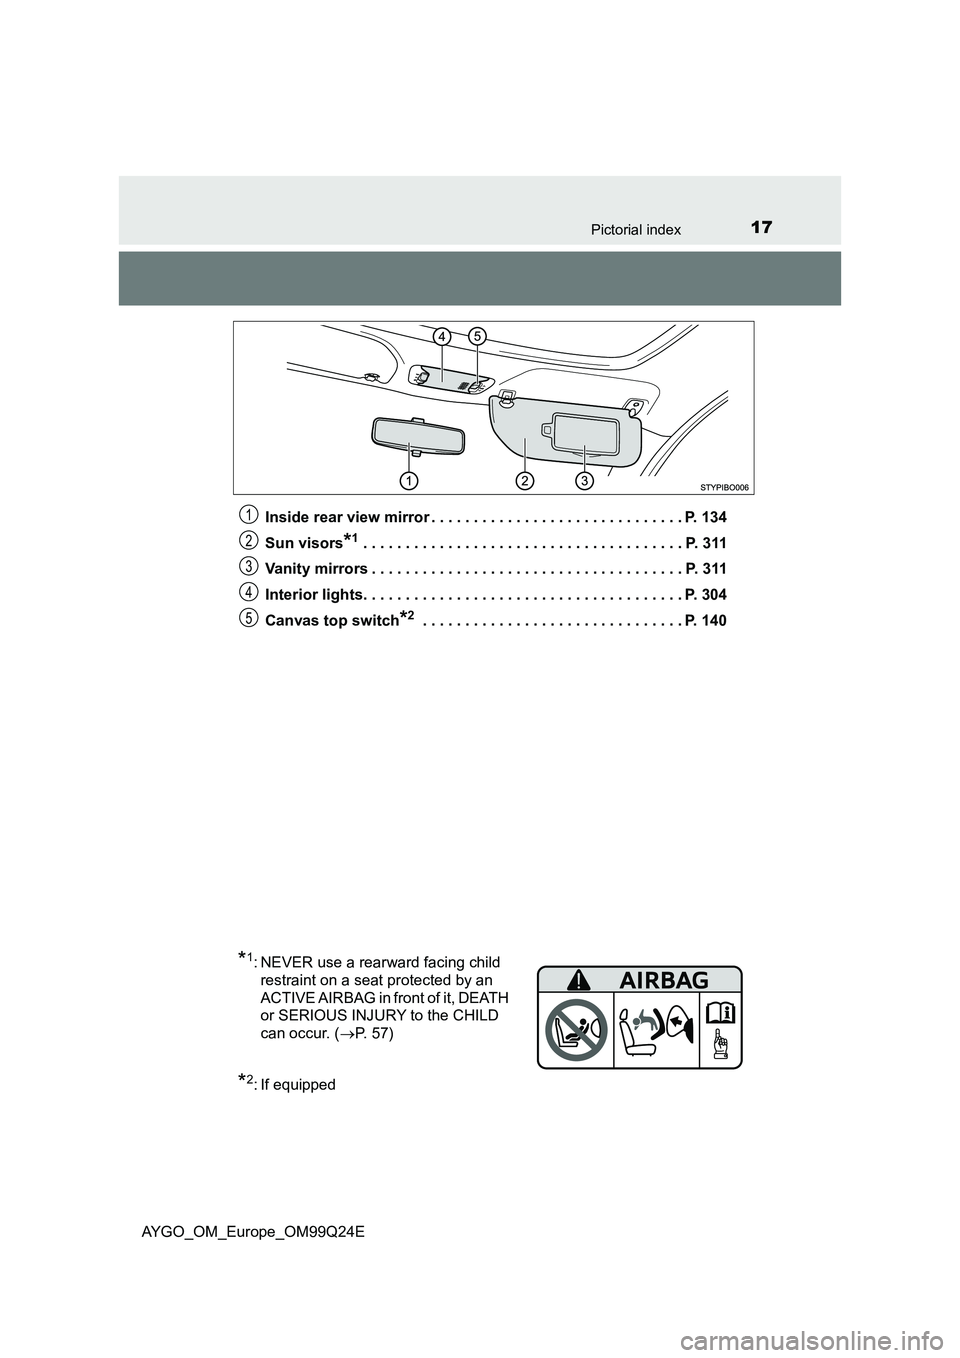 TOYOTA AYGO 2017  Owners Manual (in English) 17Pictorial index
AYGO_OM_Europe_OM99Q24E 
Inside rear view mirror . . . . . . . . . . . . . . . . . . . . . . . . . . . . . . P. 134 
Sun visors*1 . . . . . . . . . . . . . . . . . . . . . . . . . . 